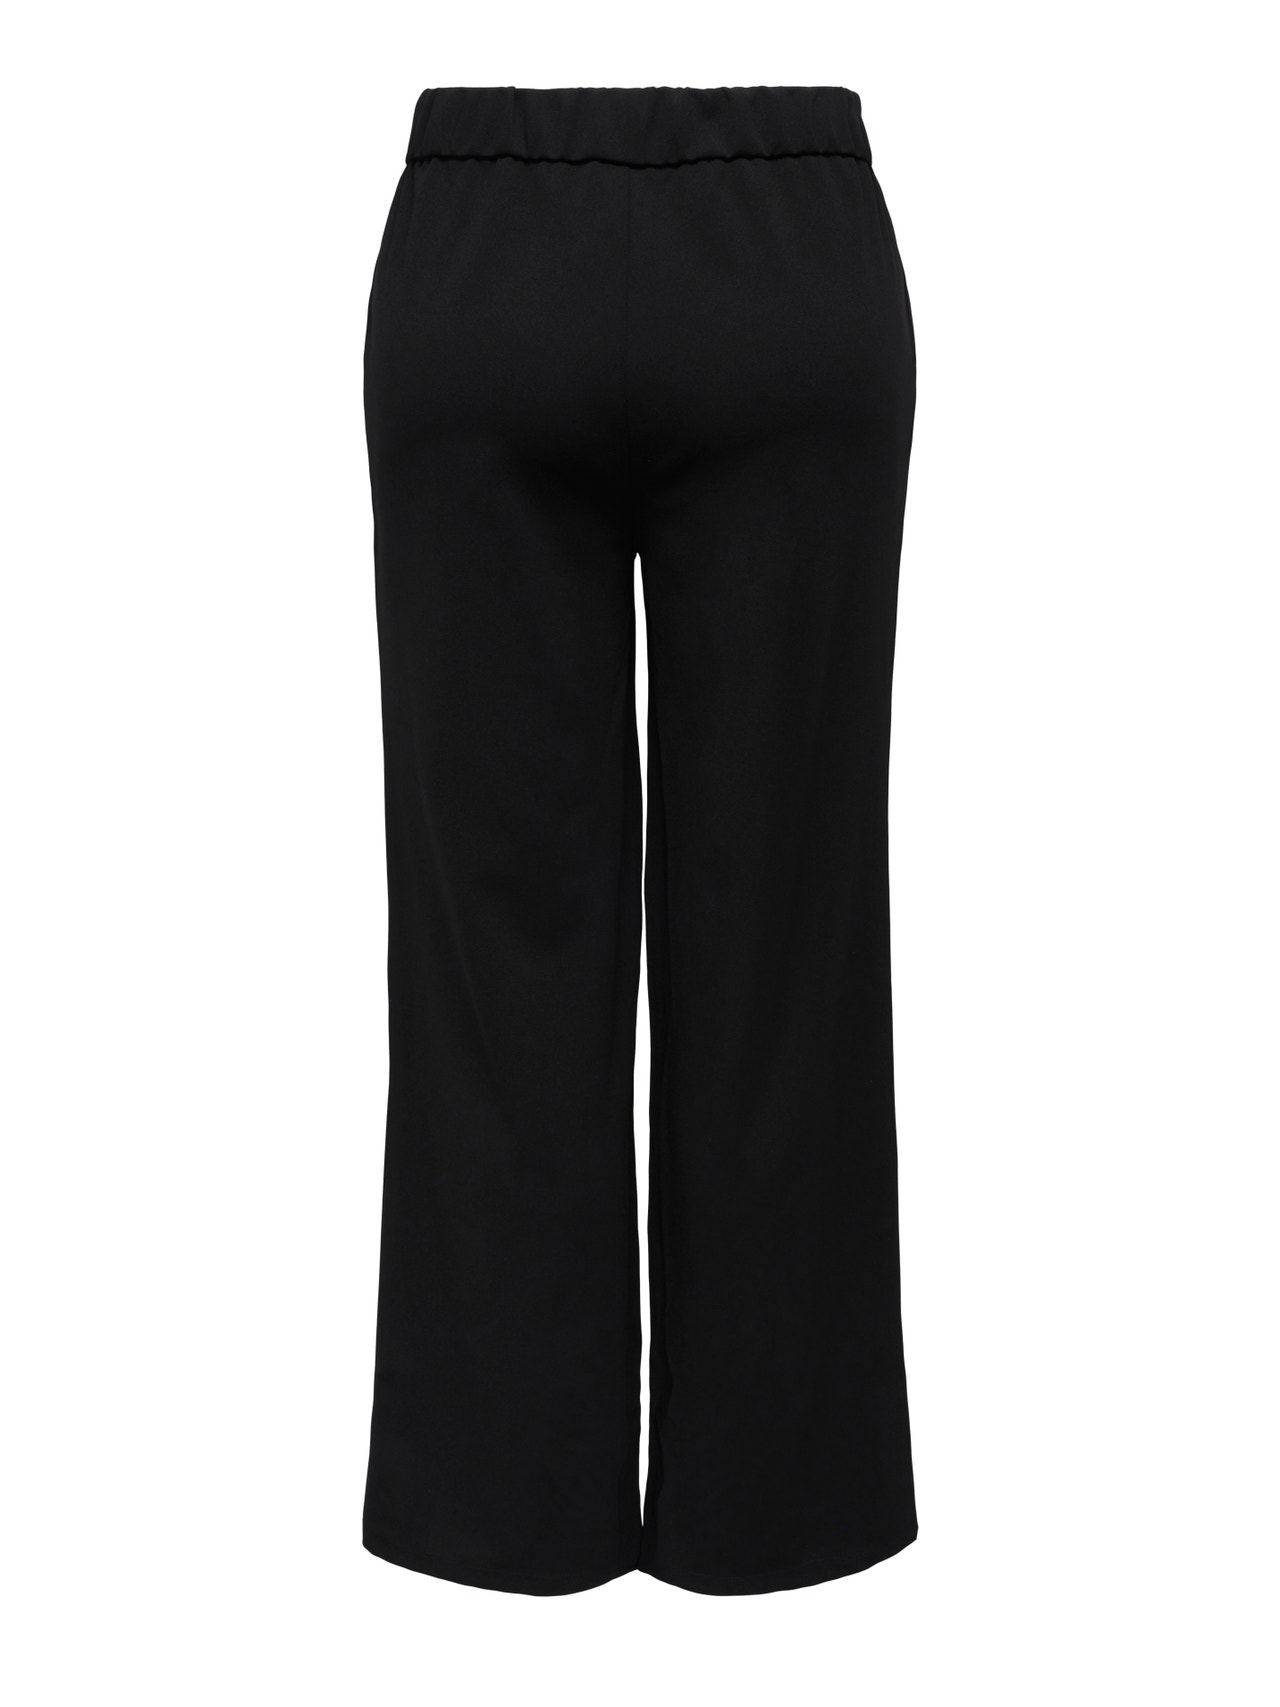 ONLY Solid colored Trousers -Black - 15273492